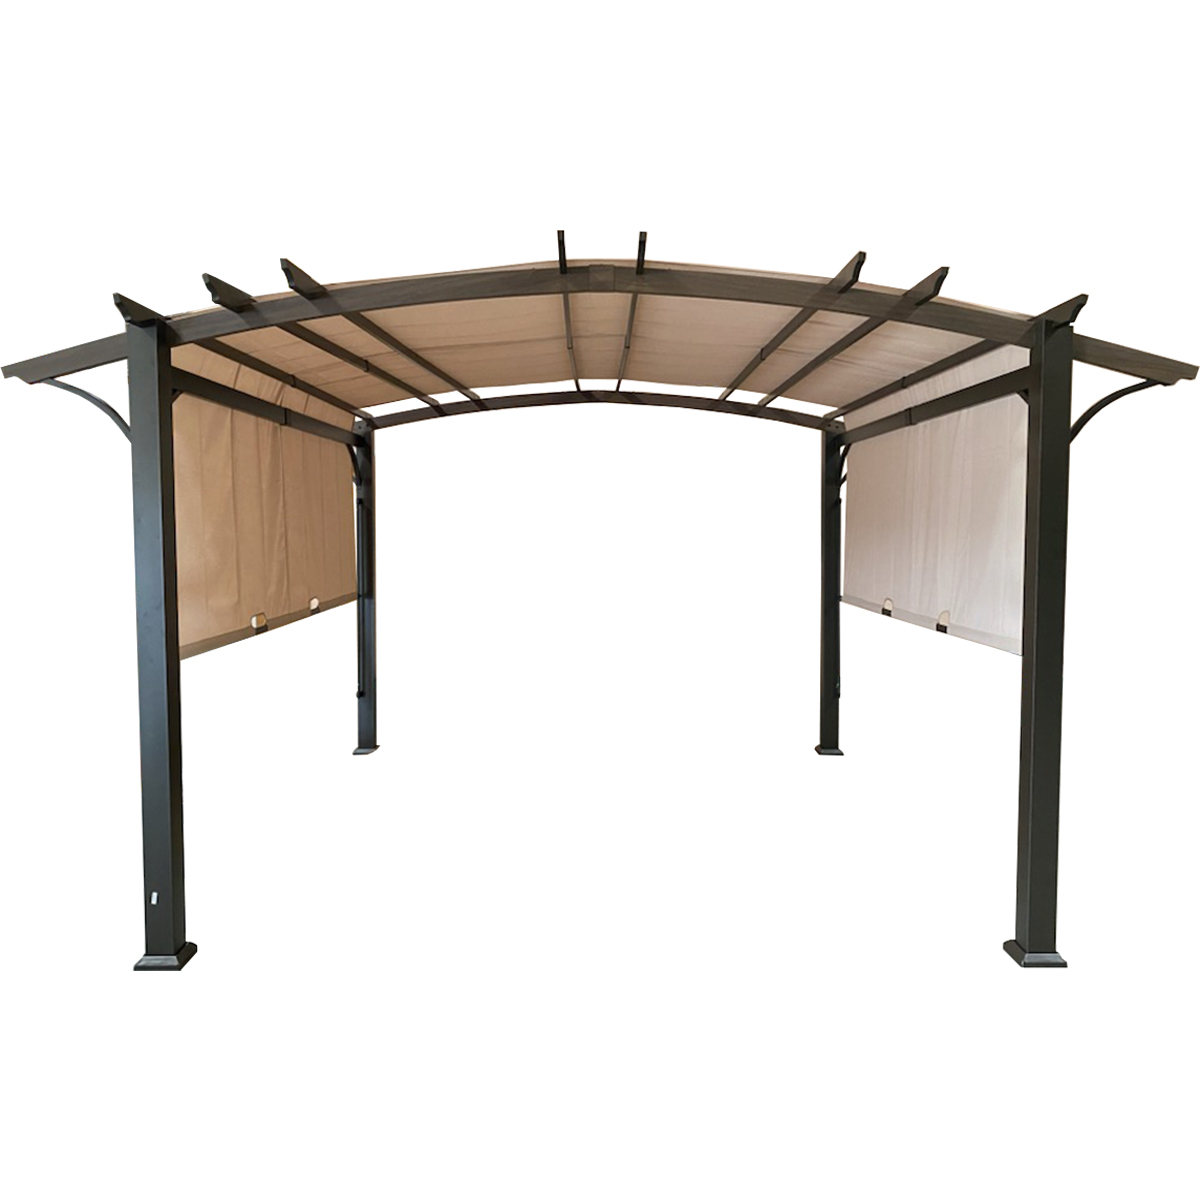 Replacement Canopy for A106009001 Orchard Park Pergola - Riplock